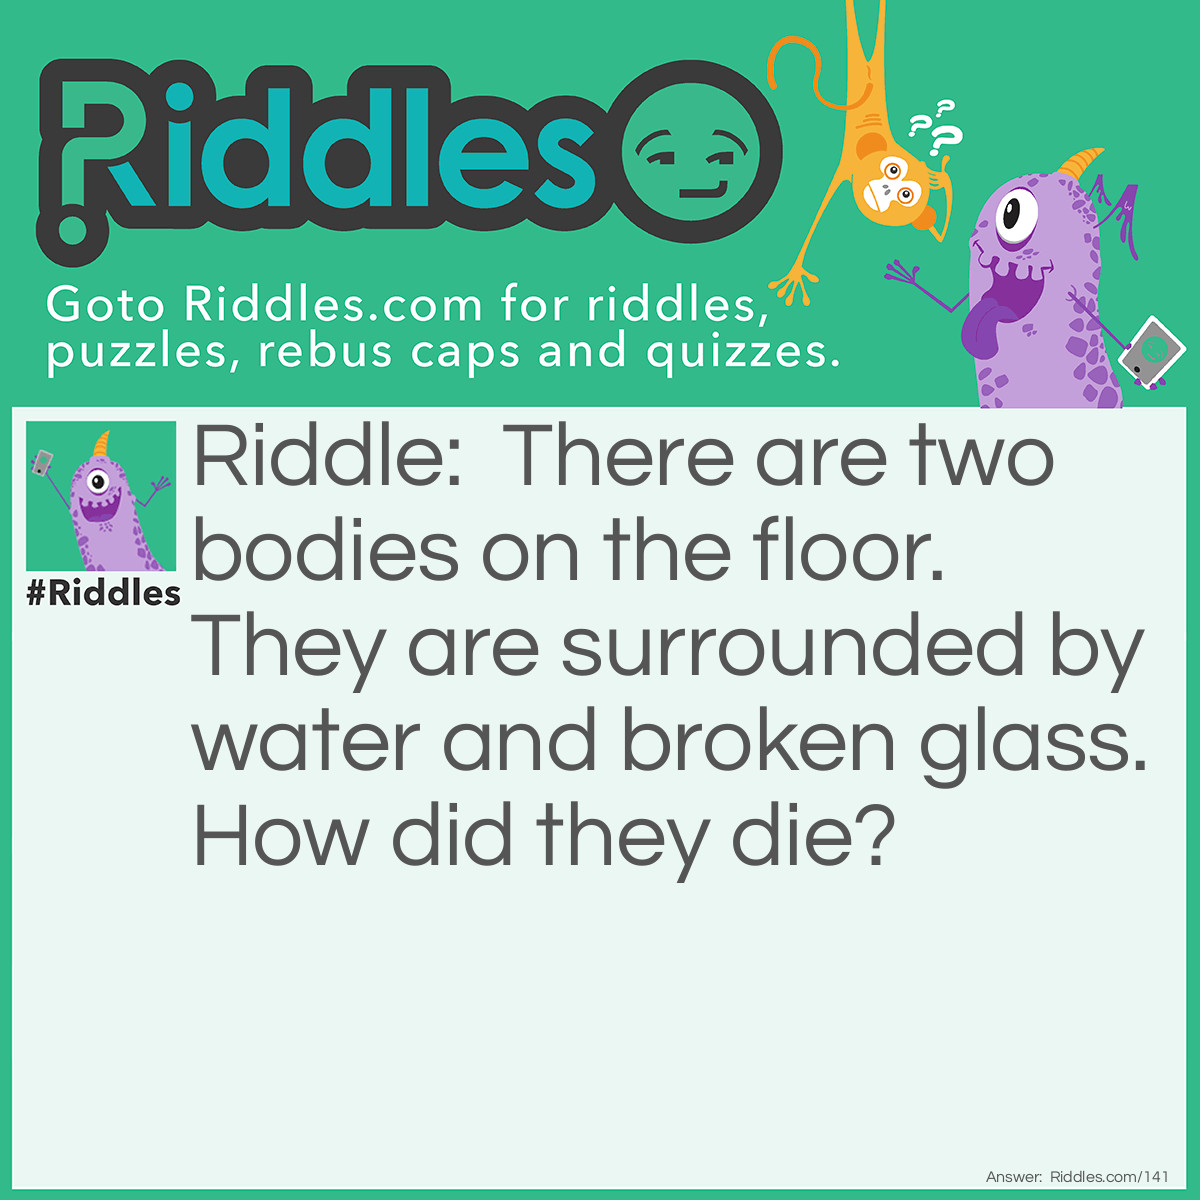 Riddle: There are two bodies on the floor. They are surrounded by water and broken glass. How did they die? Answer: The bodies were goldfish because their fishbowl got knocked over onto the floor and broke. 